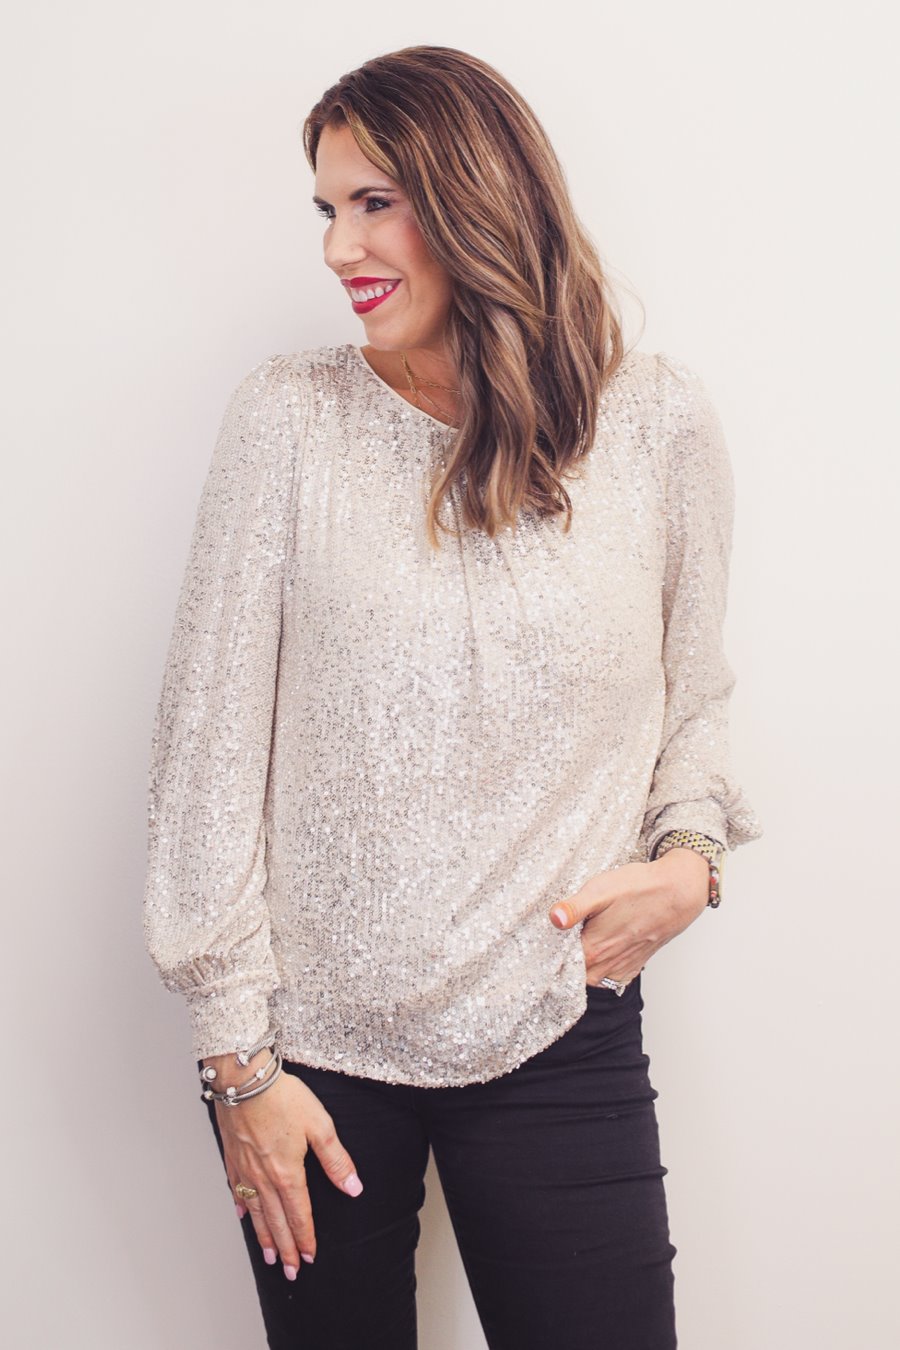 Midnight Sequin Long Sleeve Top - Jess Lea Boutique